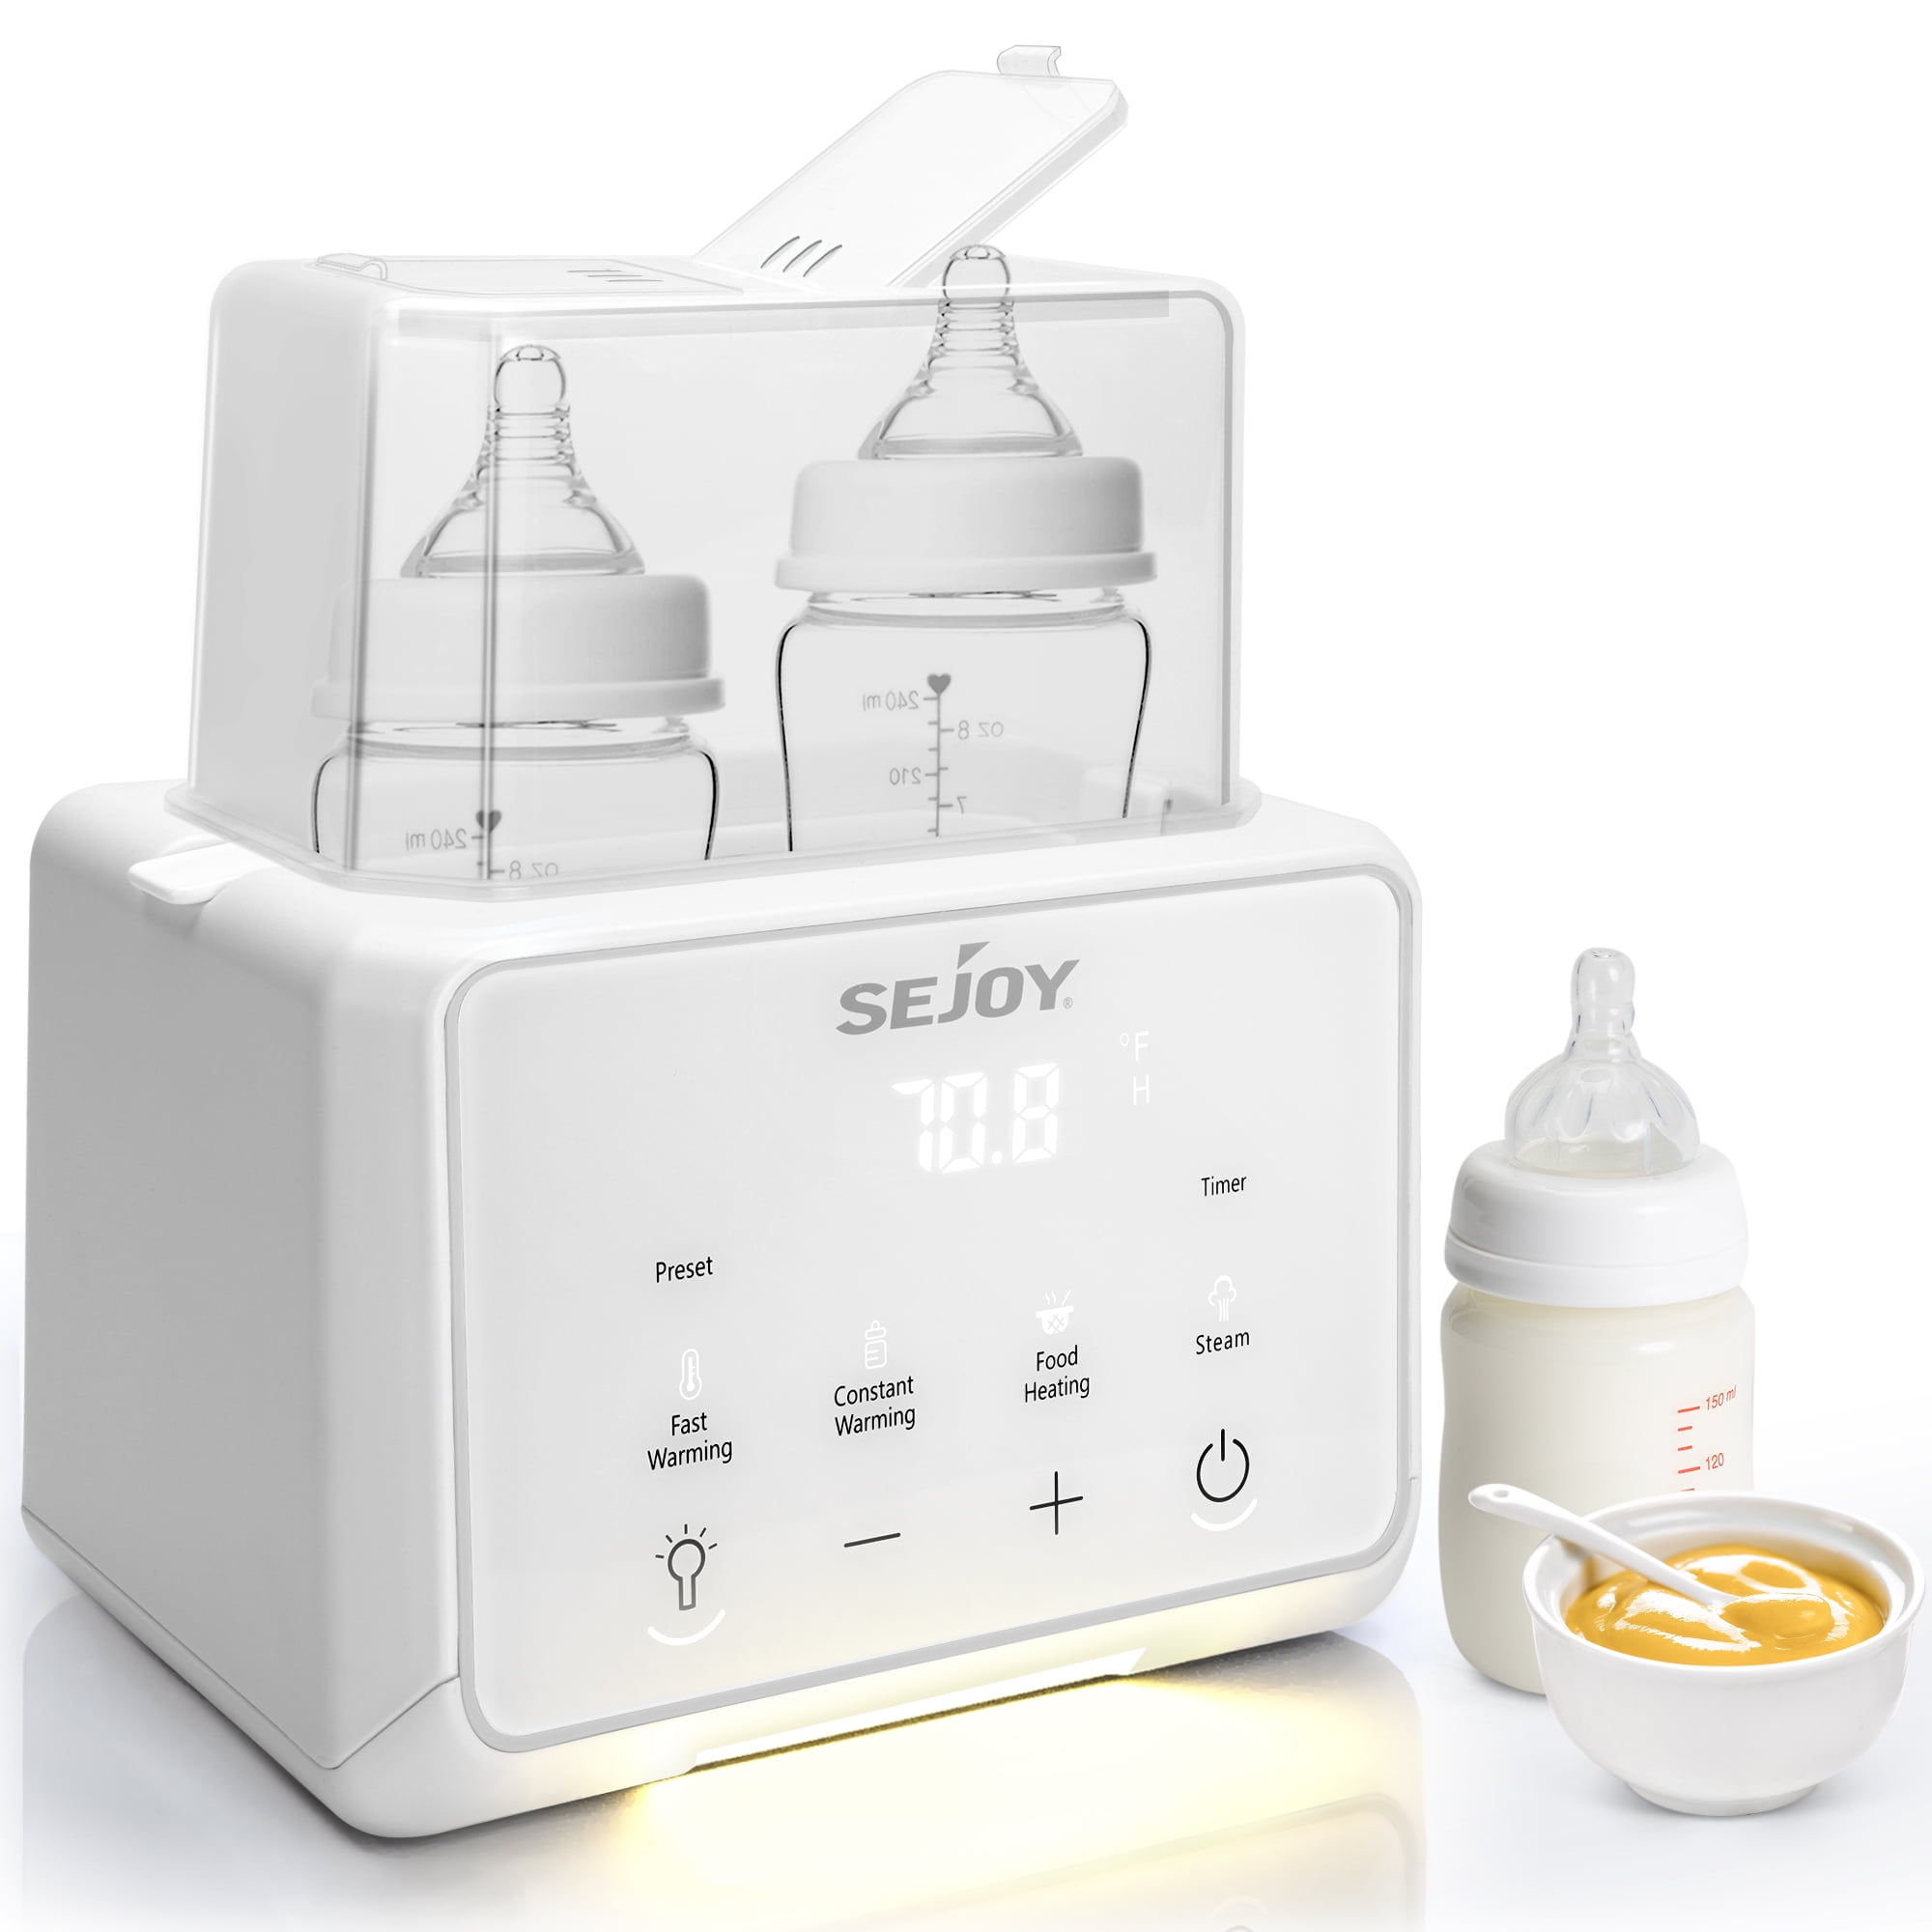 Sejoy Electric Tea Coffee Kettle, Temperature Control, Warm Water Instant Dispenser for Making Formula 0920#TN1815-BLUWHI-US